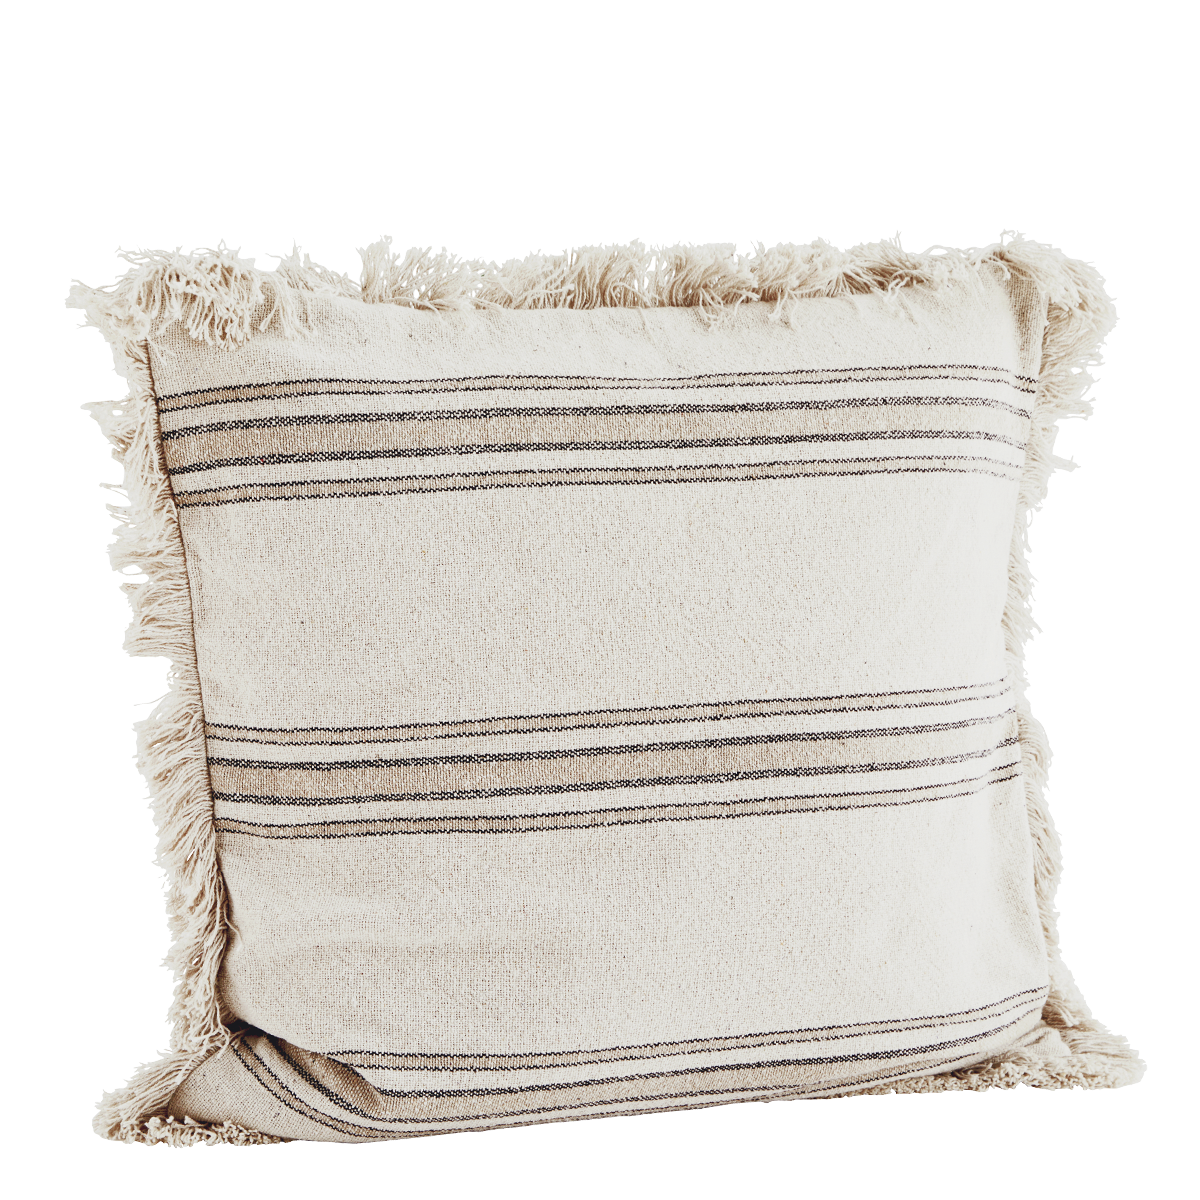 Striped cushion cover w/ fringes